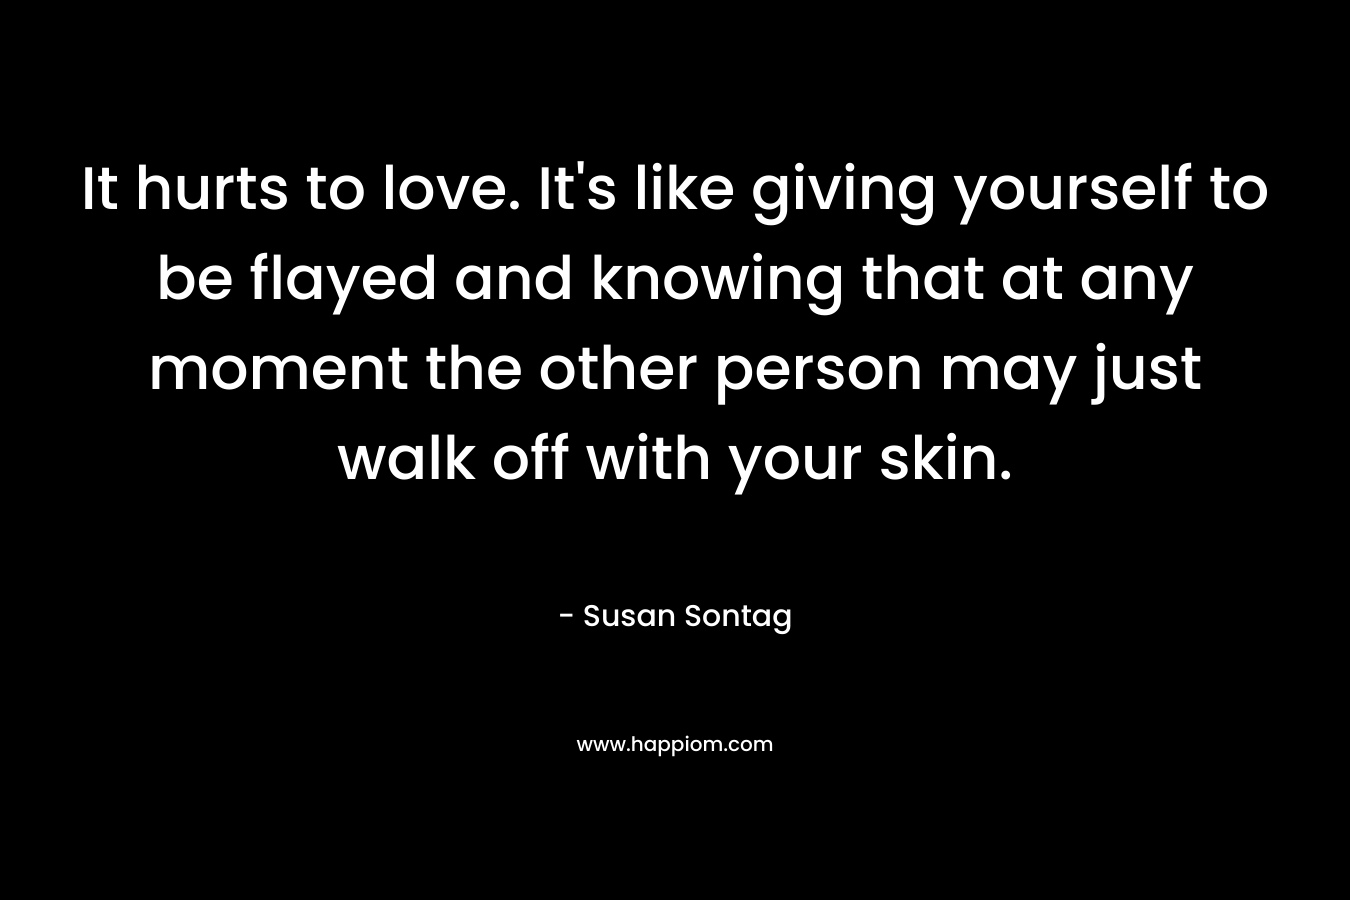 It hurts to love. It’s like giving yourself to be flayed and knowing that at any moment the other person may just walk off with your skin. – Susan Sontag